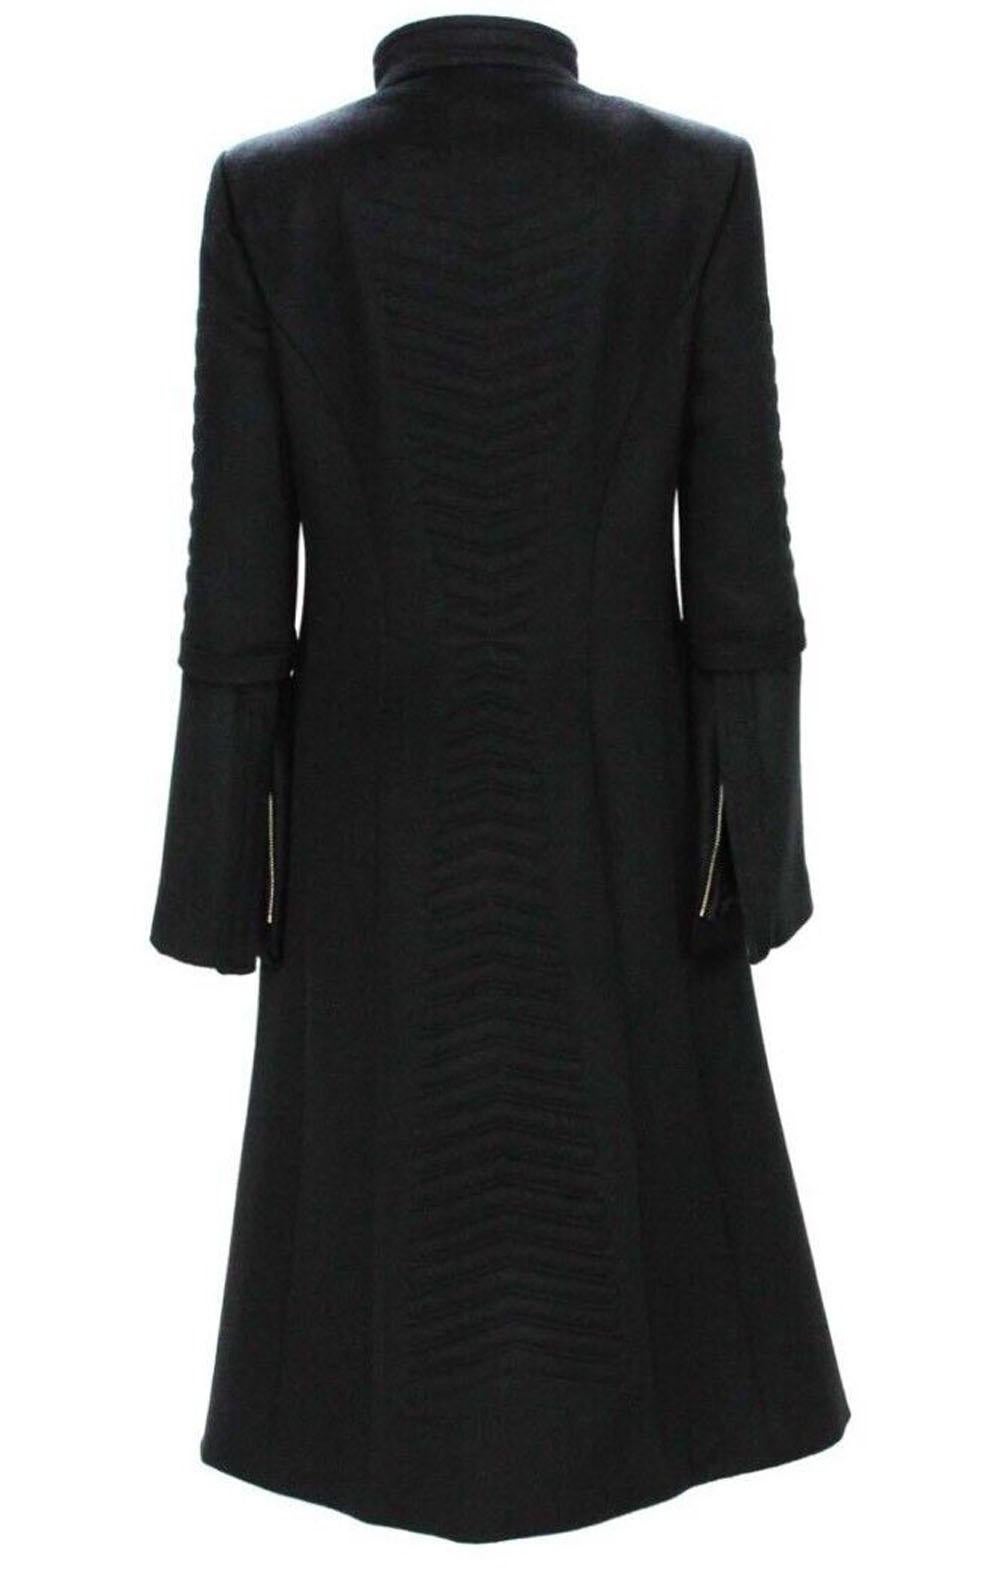 Tom Ford for Gucci F/W 2004 Black Angora Wool Chevron Pattern Coat with Belt  42 For Sale 4